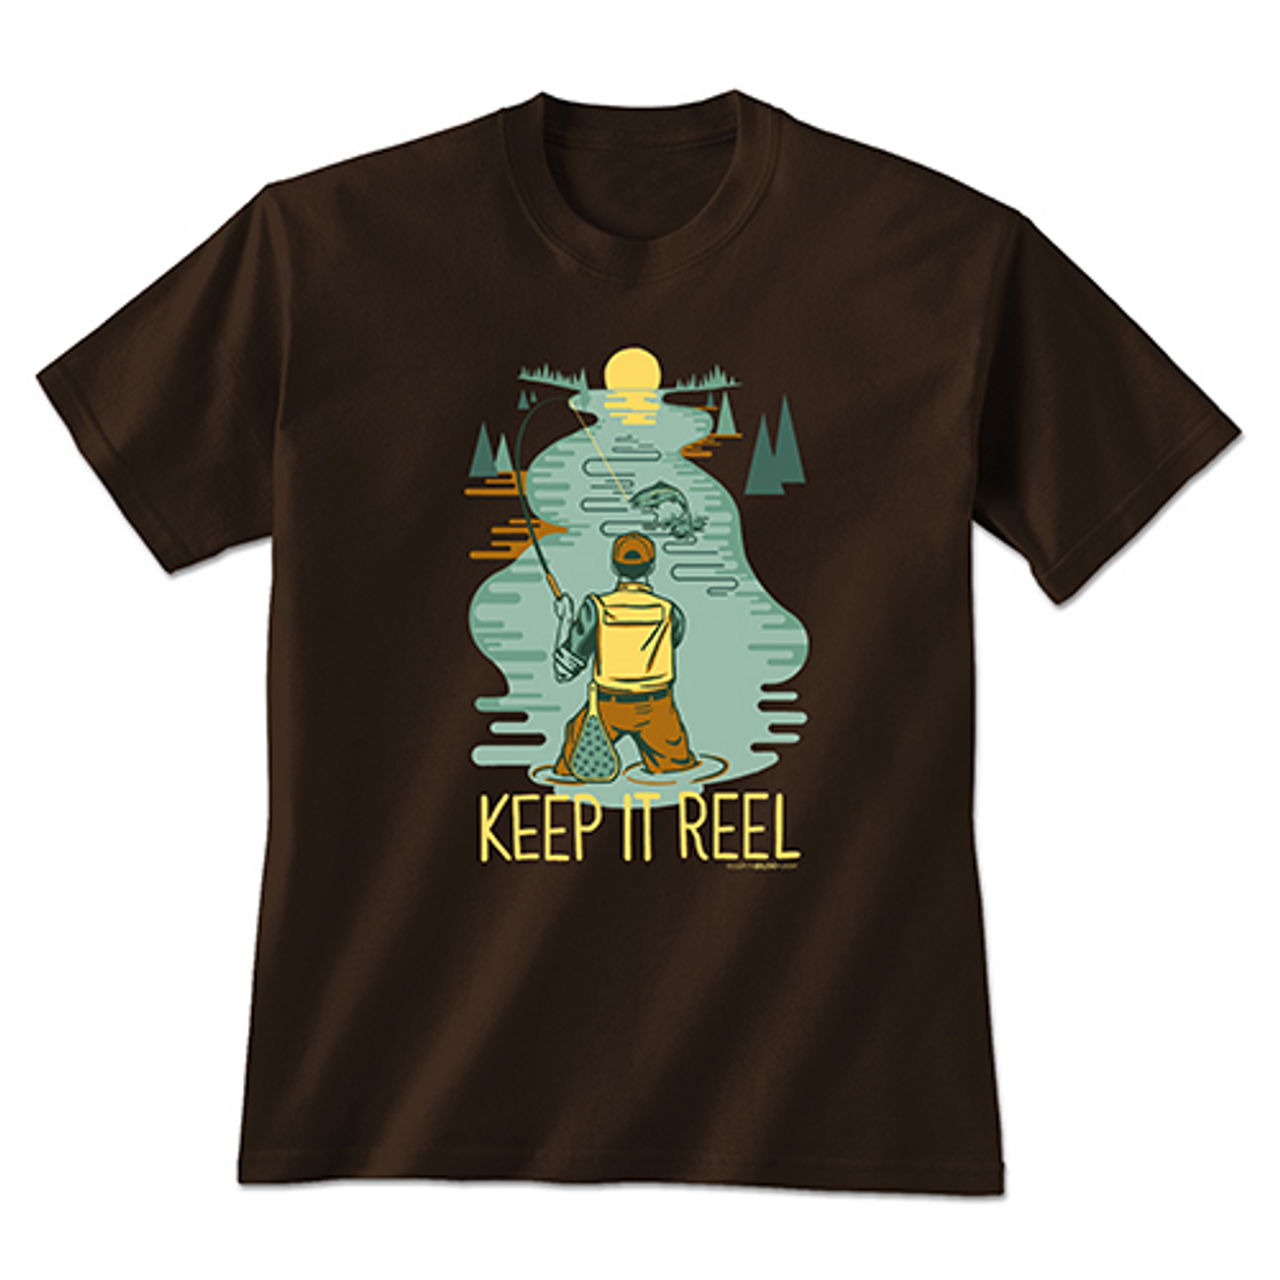 Keep it Reel tshirt* - Mother Nature's Mercantile